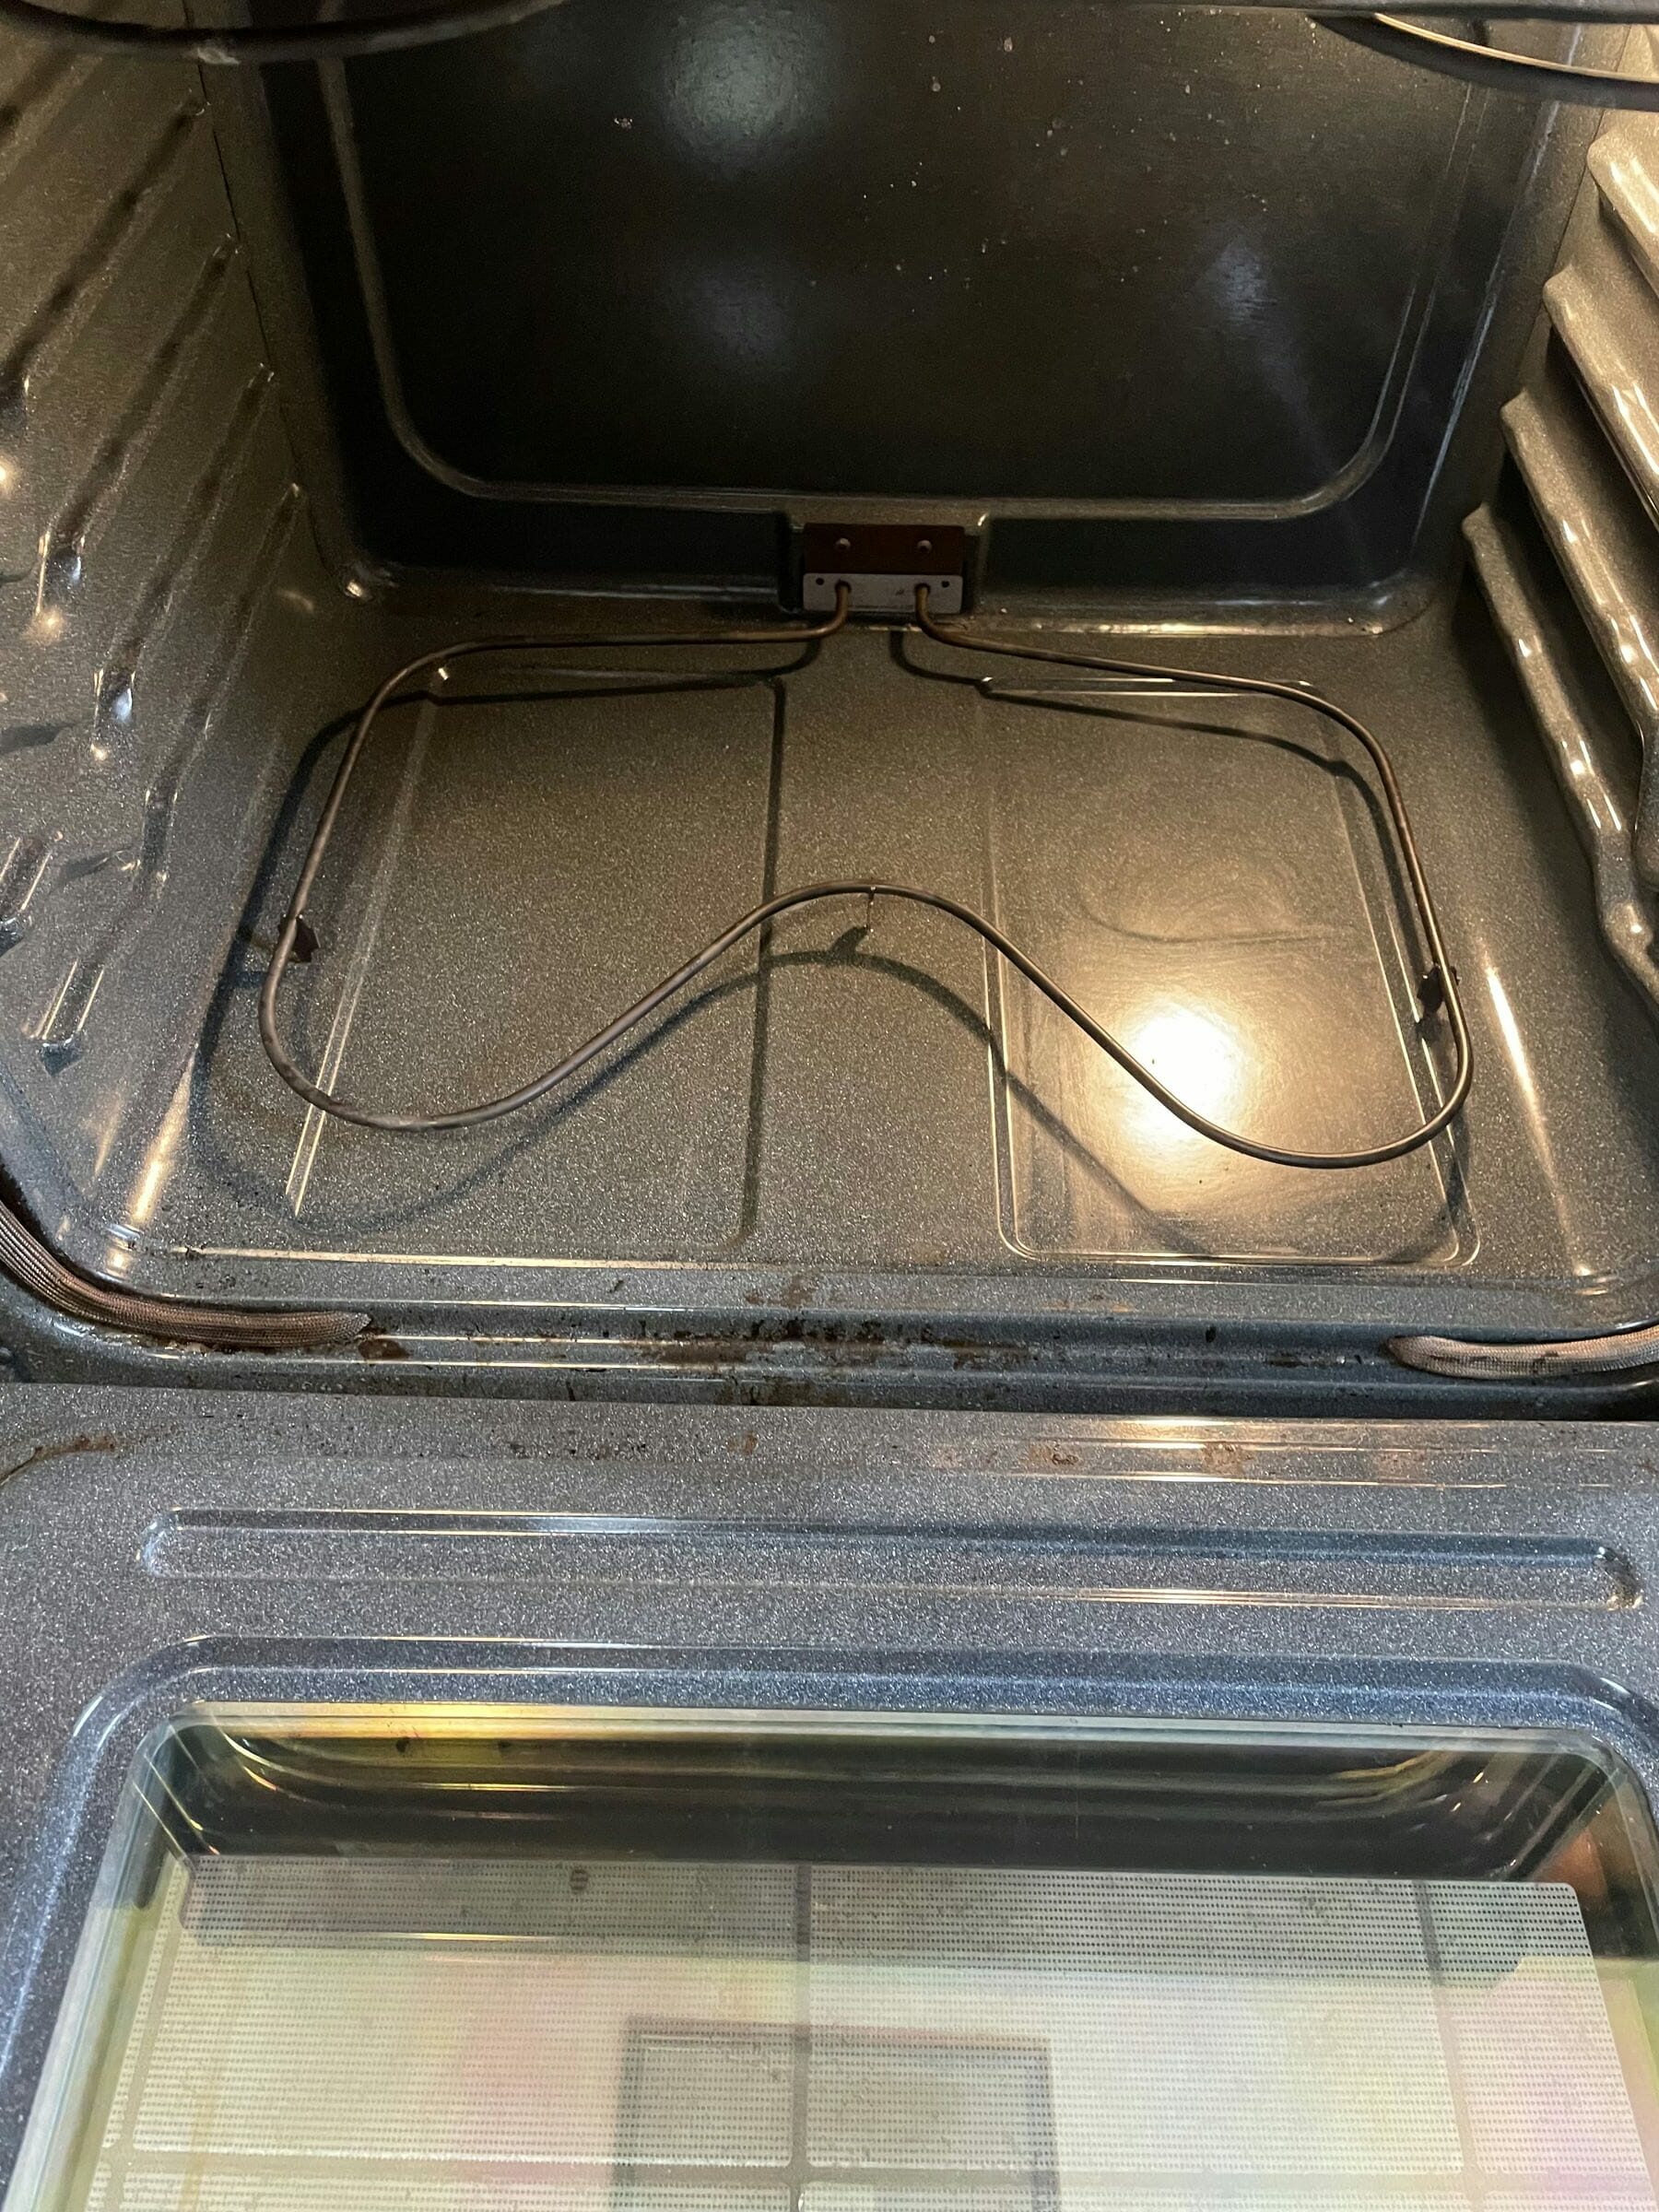 Happy home maid service oven after 1 e1685690286700